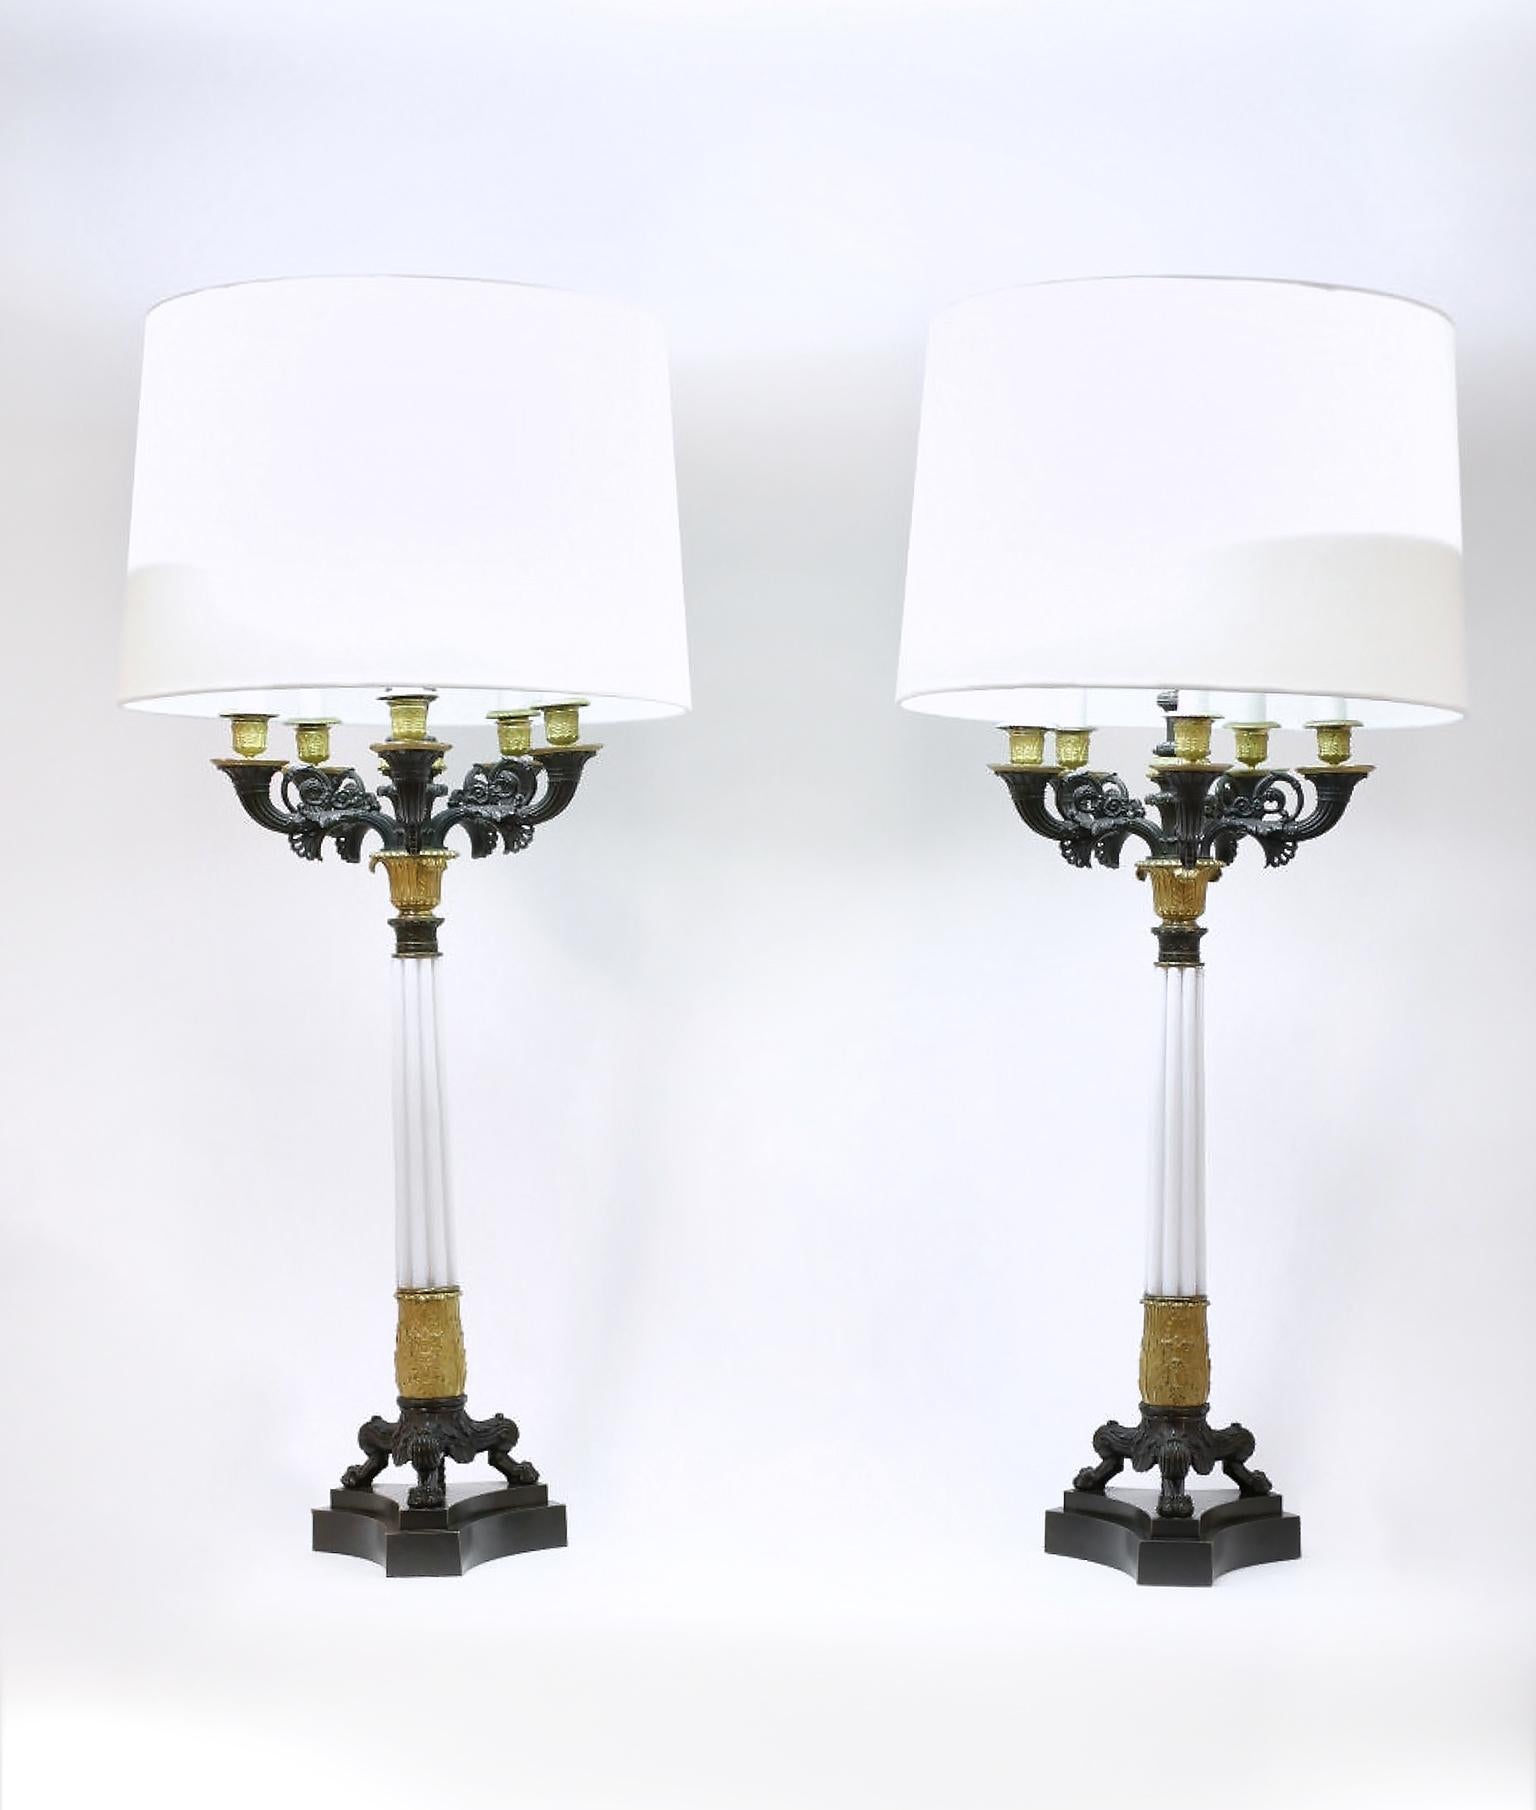 Impressive pair of gilt bronze with art glass column candelabras table lamps. Each lamp is in great working vintage condition. Minor wear consistent with age / use. Each lamp stand about 38 inches high. Each drum shade is 11